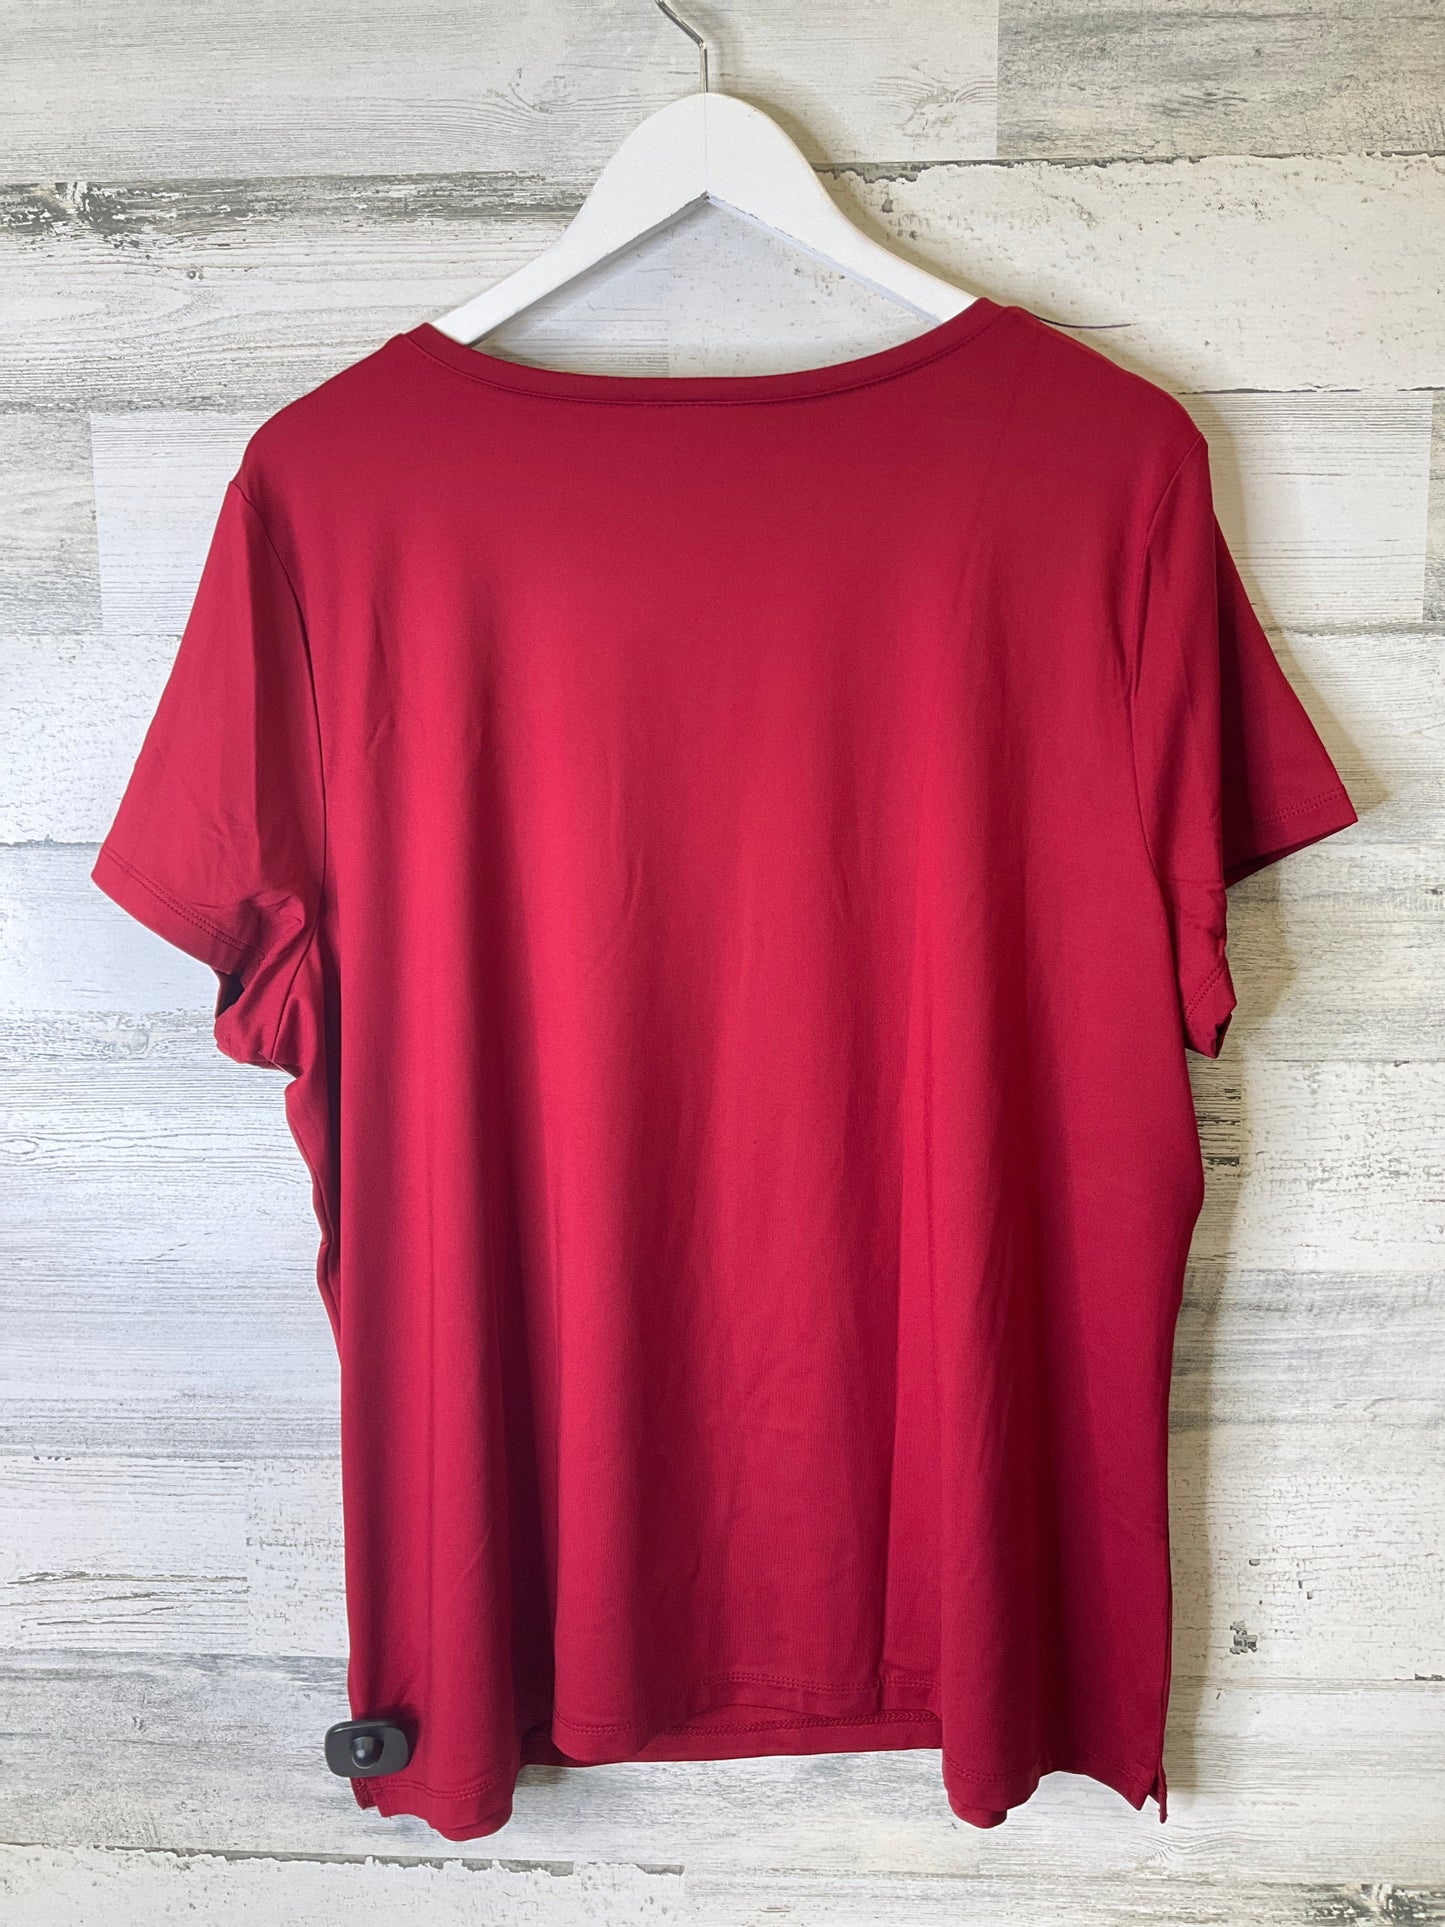 Red Top Short Sleeve East 5th, Size 2x